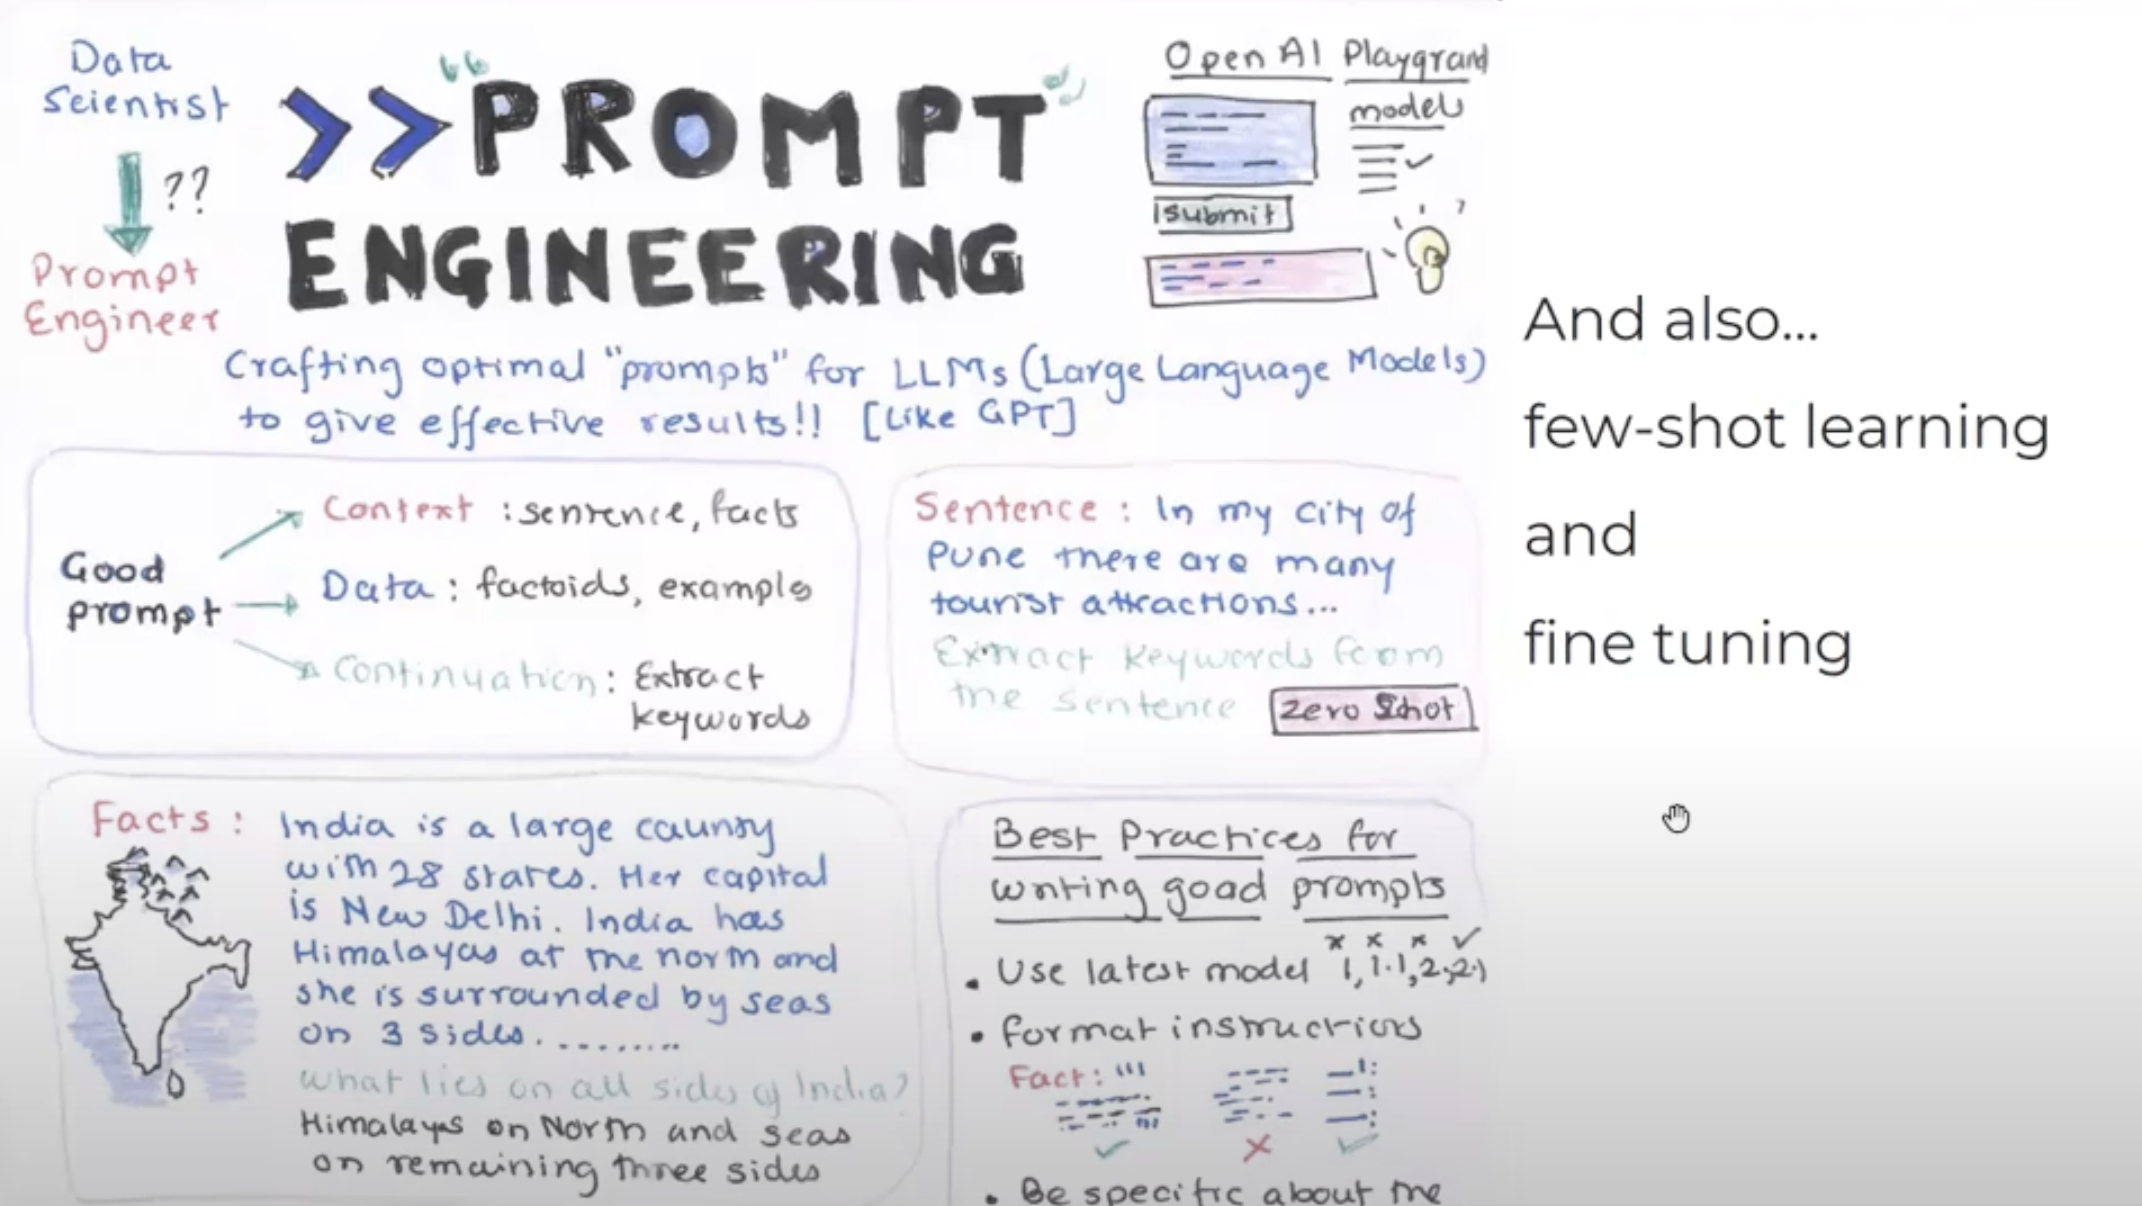 drawing of the various possibilities offered by prompt engineering